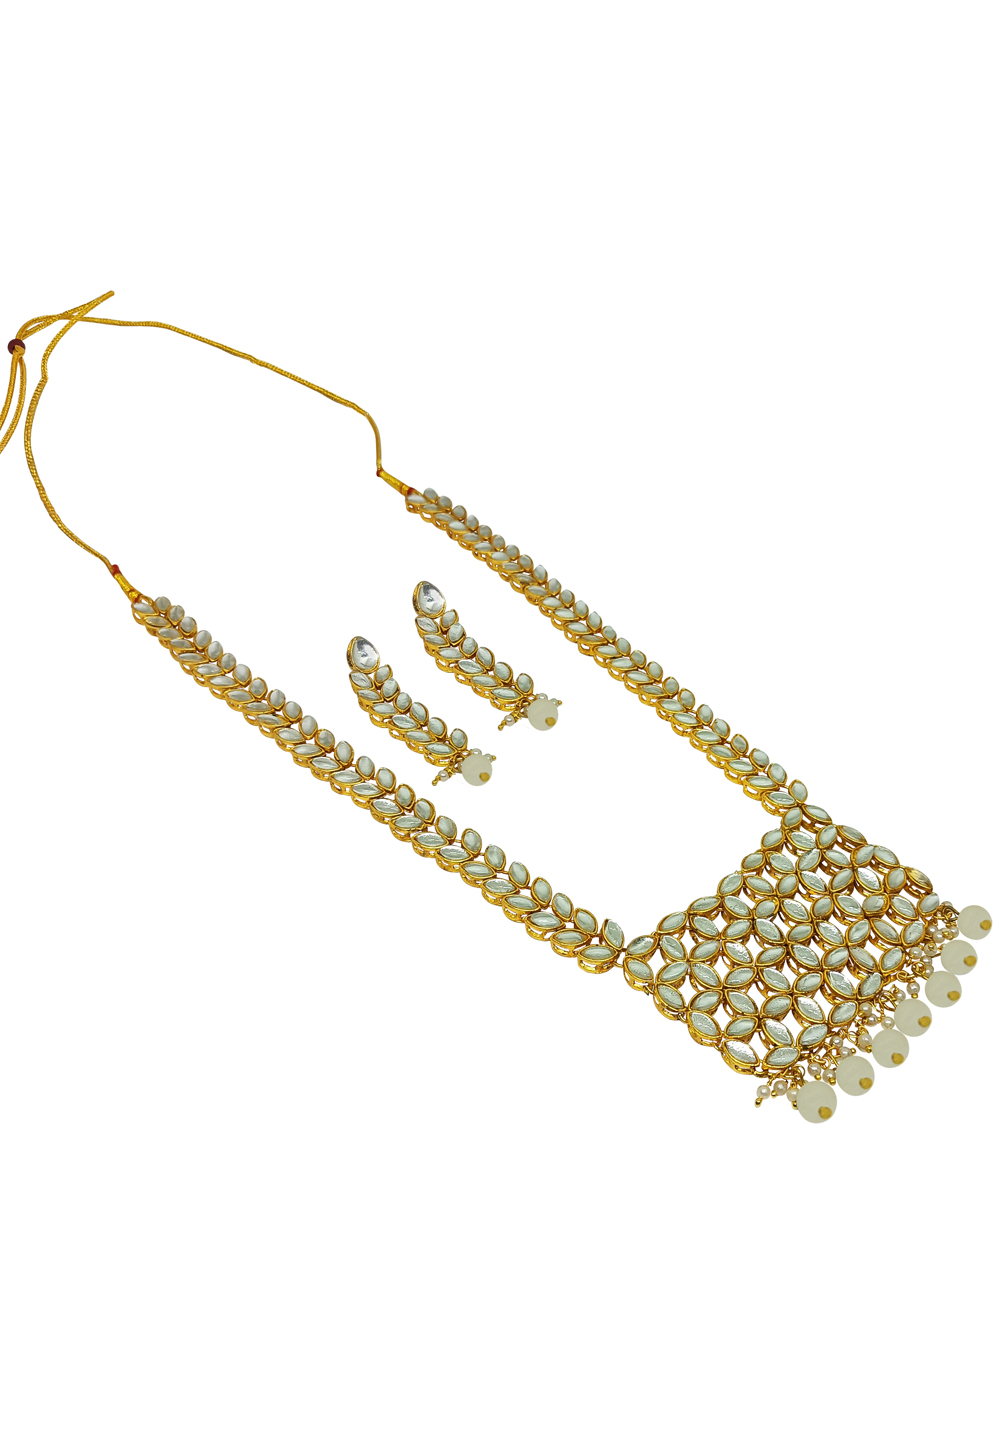 Off White Alloy Austrian Diamonds And Kundan Necklace Set With Earrings 269271